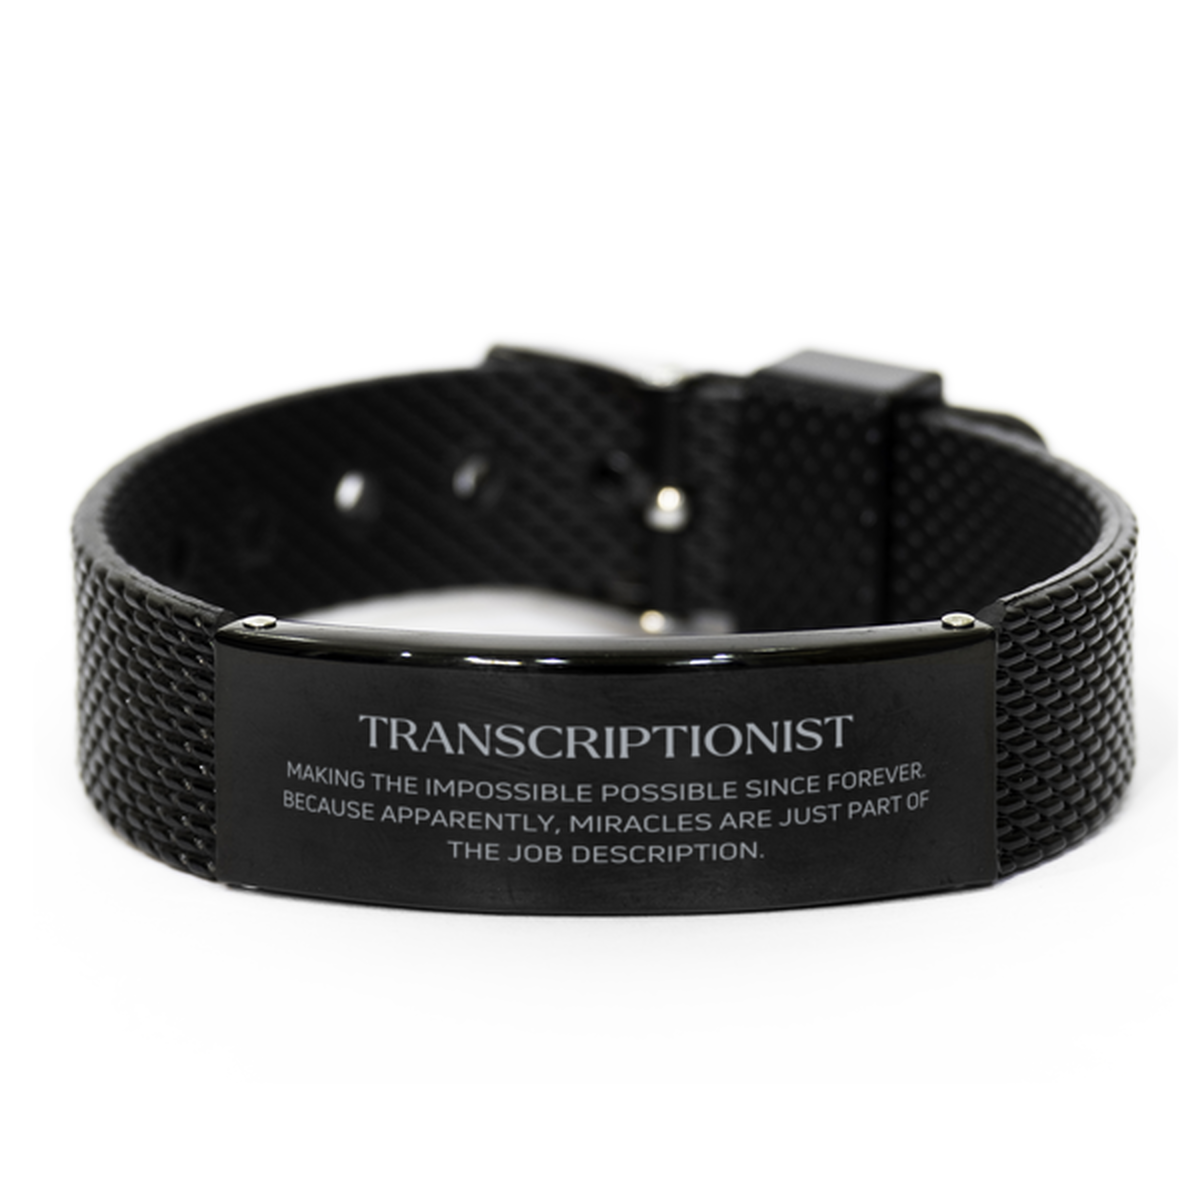 Funny Transcriptionist Gifts, Miracles are just part of the job description, Inspirational Birthday Black Shark Mesh Bracelet For Transcriptionist, Men, Women, Coworkers, Friends, Boss